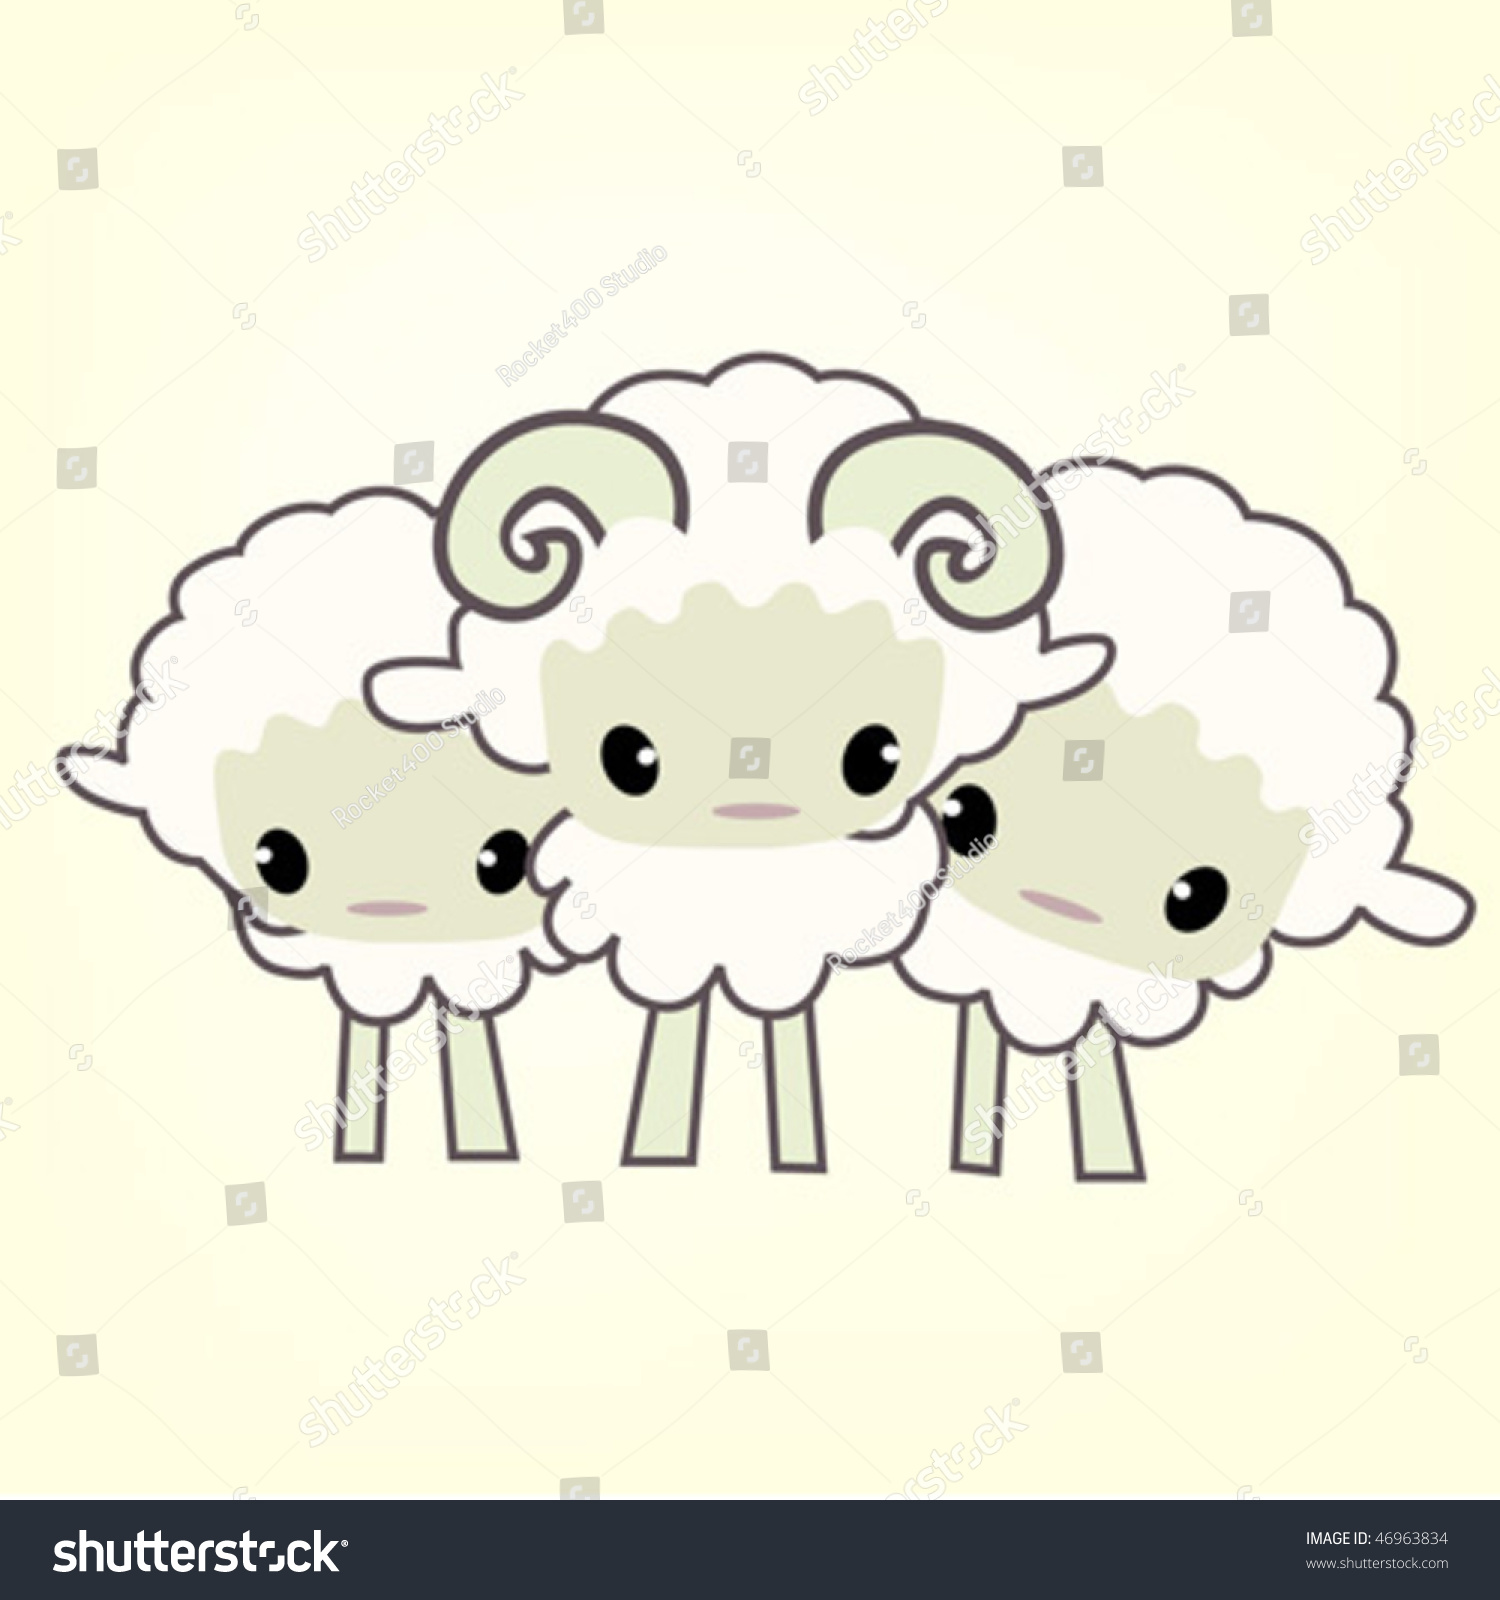 Download Little Lambs Stock Vector (Royalty Free) 46963834 ...